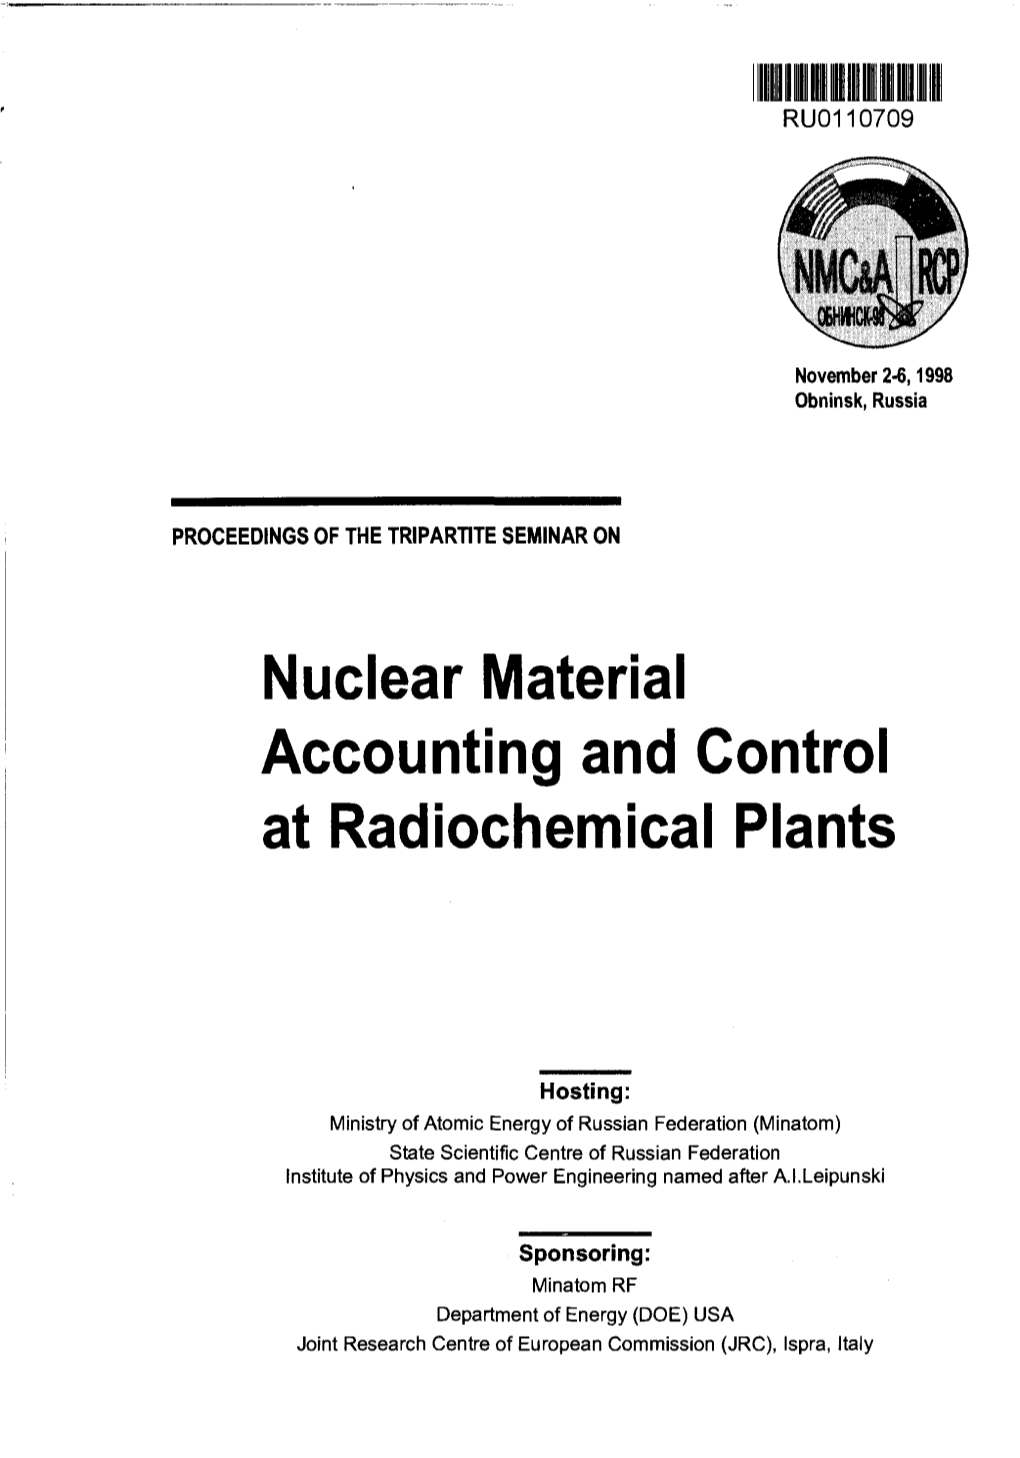 Nuclear Material Accounting and Control at Radiochemical Plants